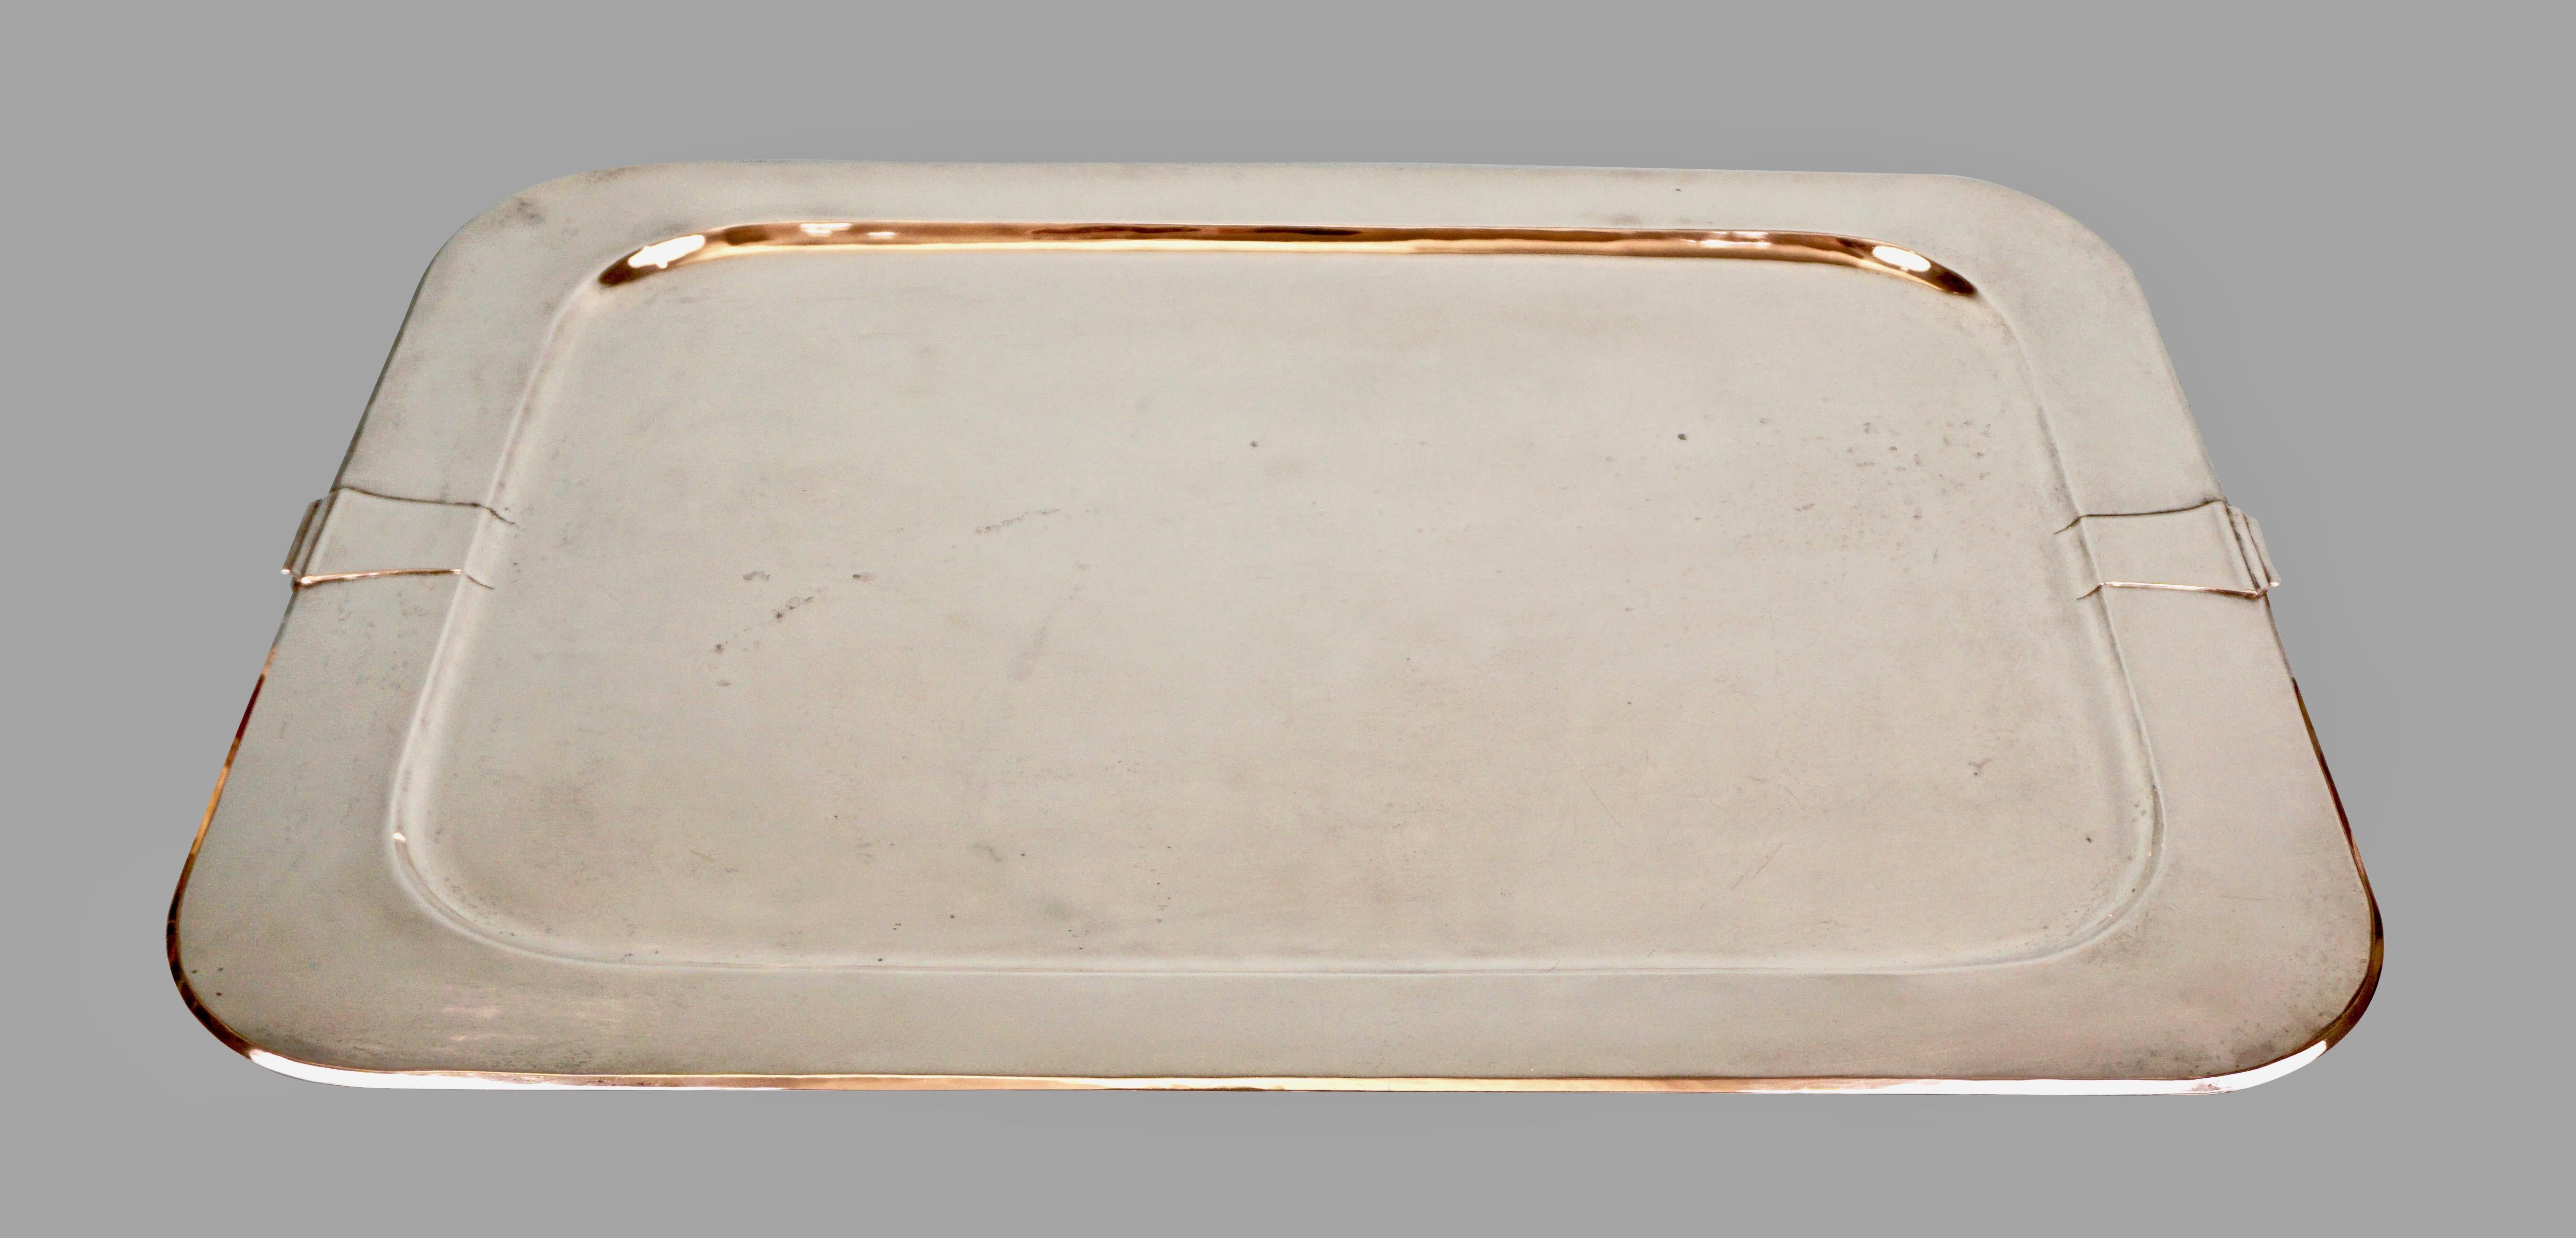 An elegant sterling silver tray of simple form with restrained handles in the art moderne style. Stamped with the Dirk Van Erp windmill mark on the underside and the word sterling. This piece was produced during the period after William Van Erp,